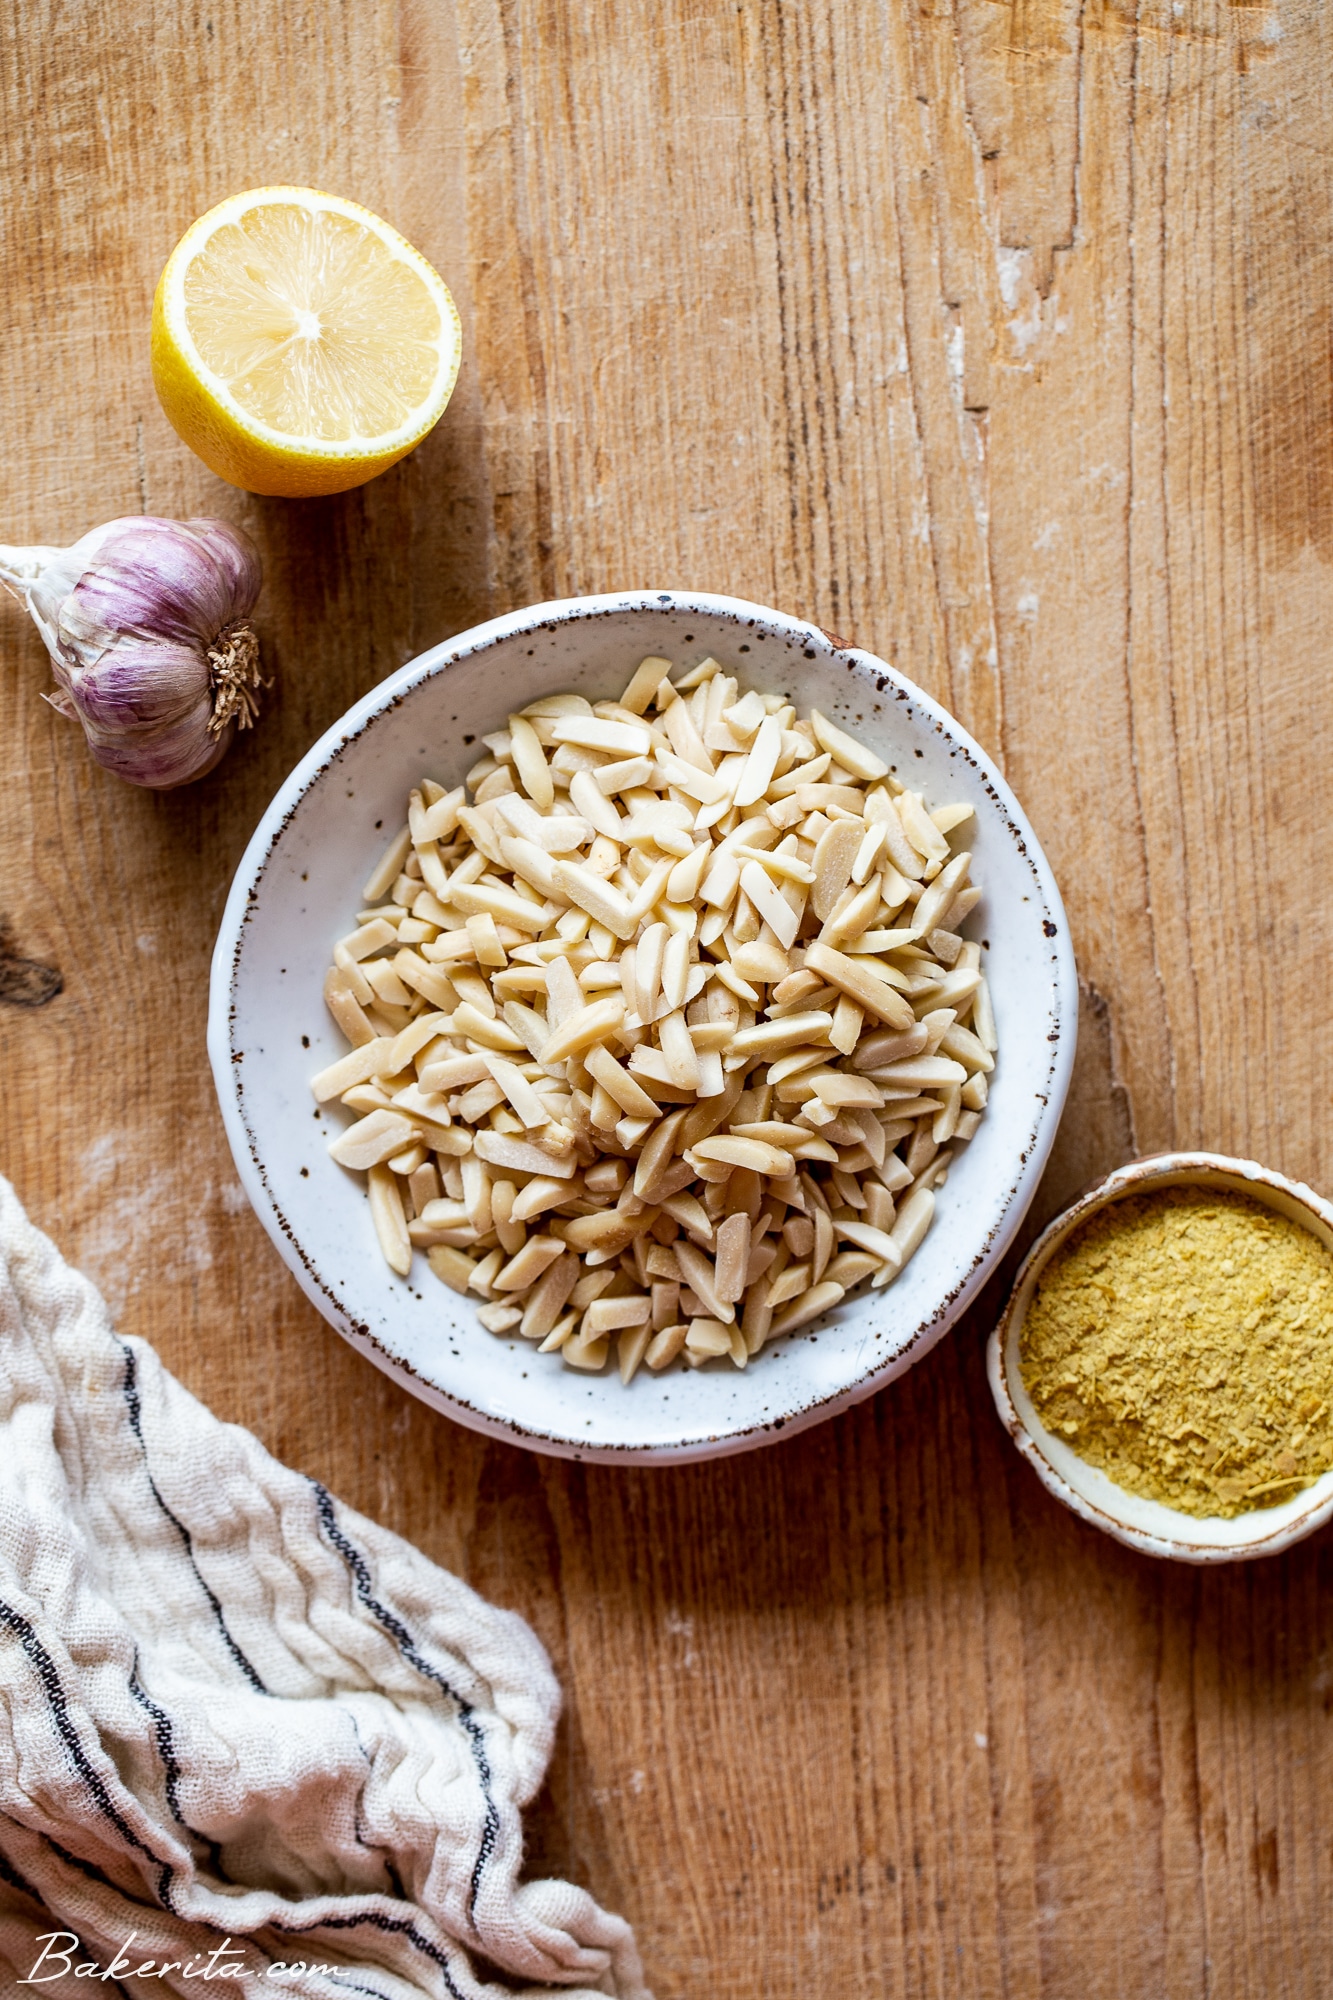 Wood background with slivered almonds in a white ceramic bowl, nutritional yeast, garlic, and lemon around the board.